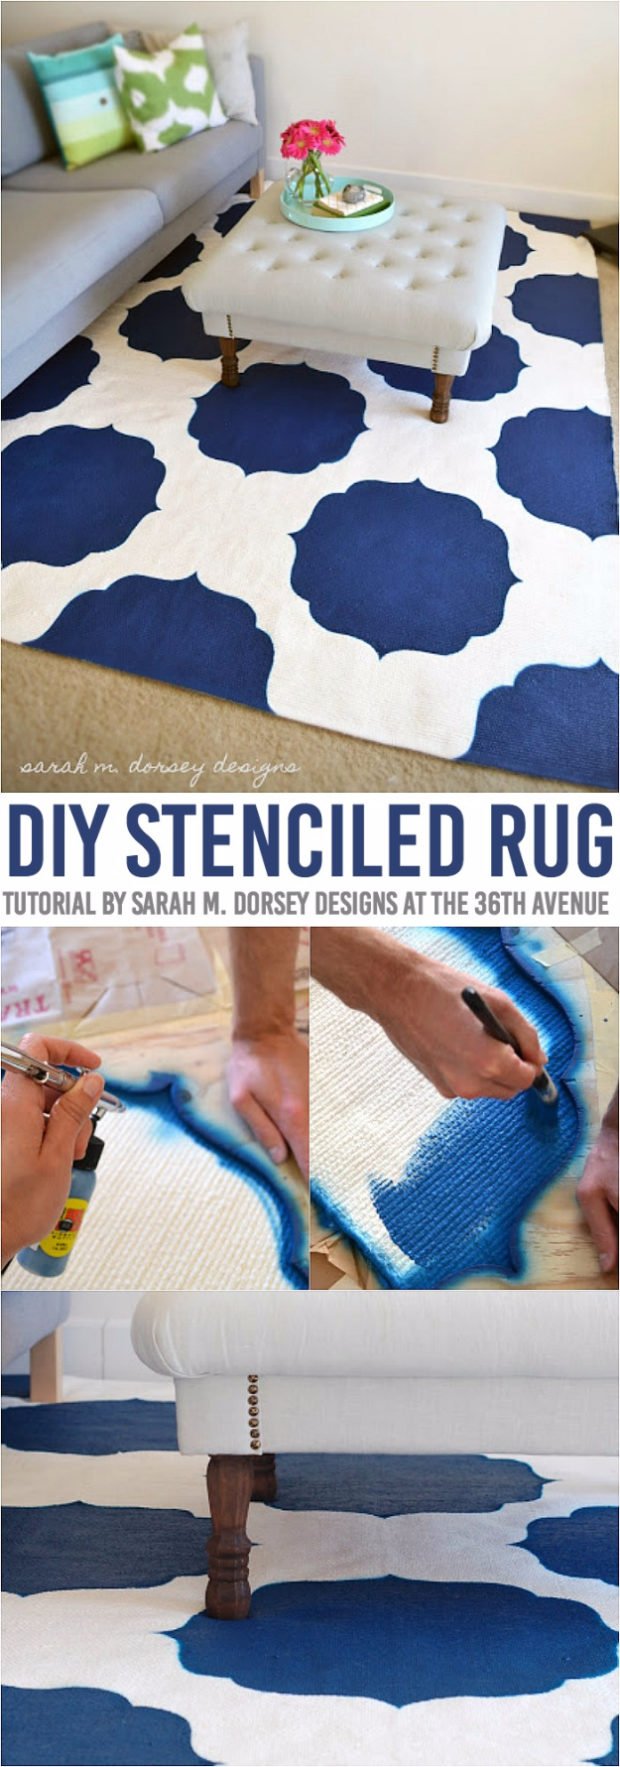 15 Chic DIY Rug Ideas You Can Make Right Away! (7)